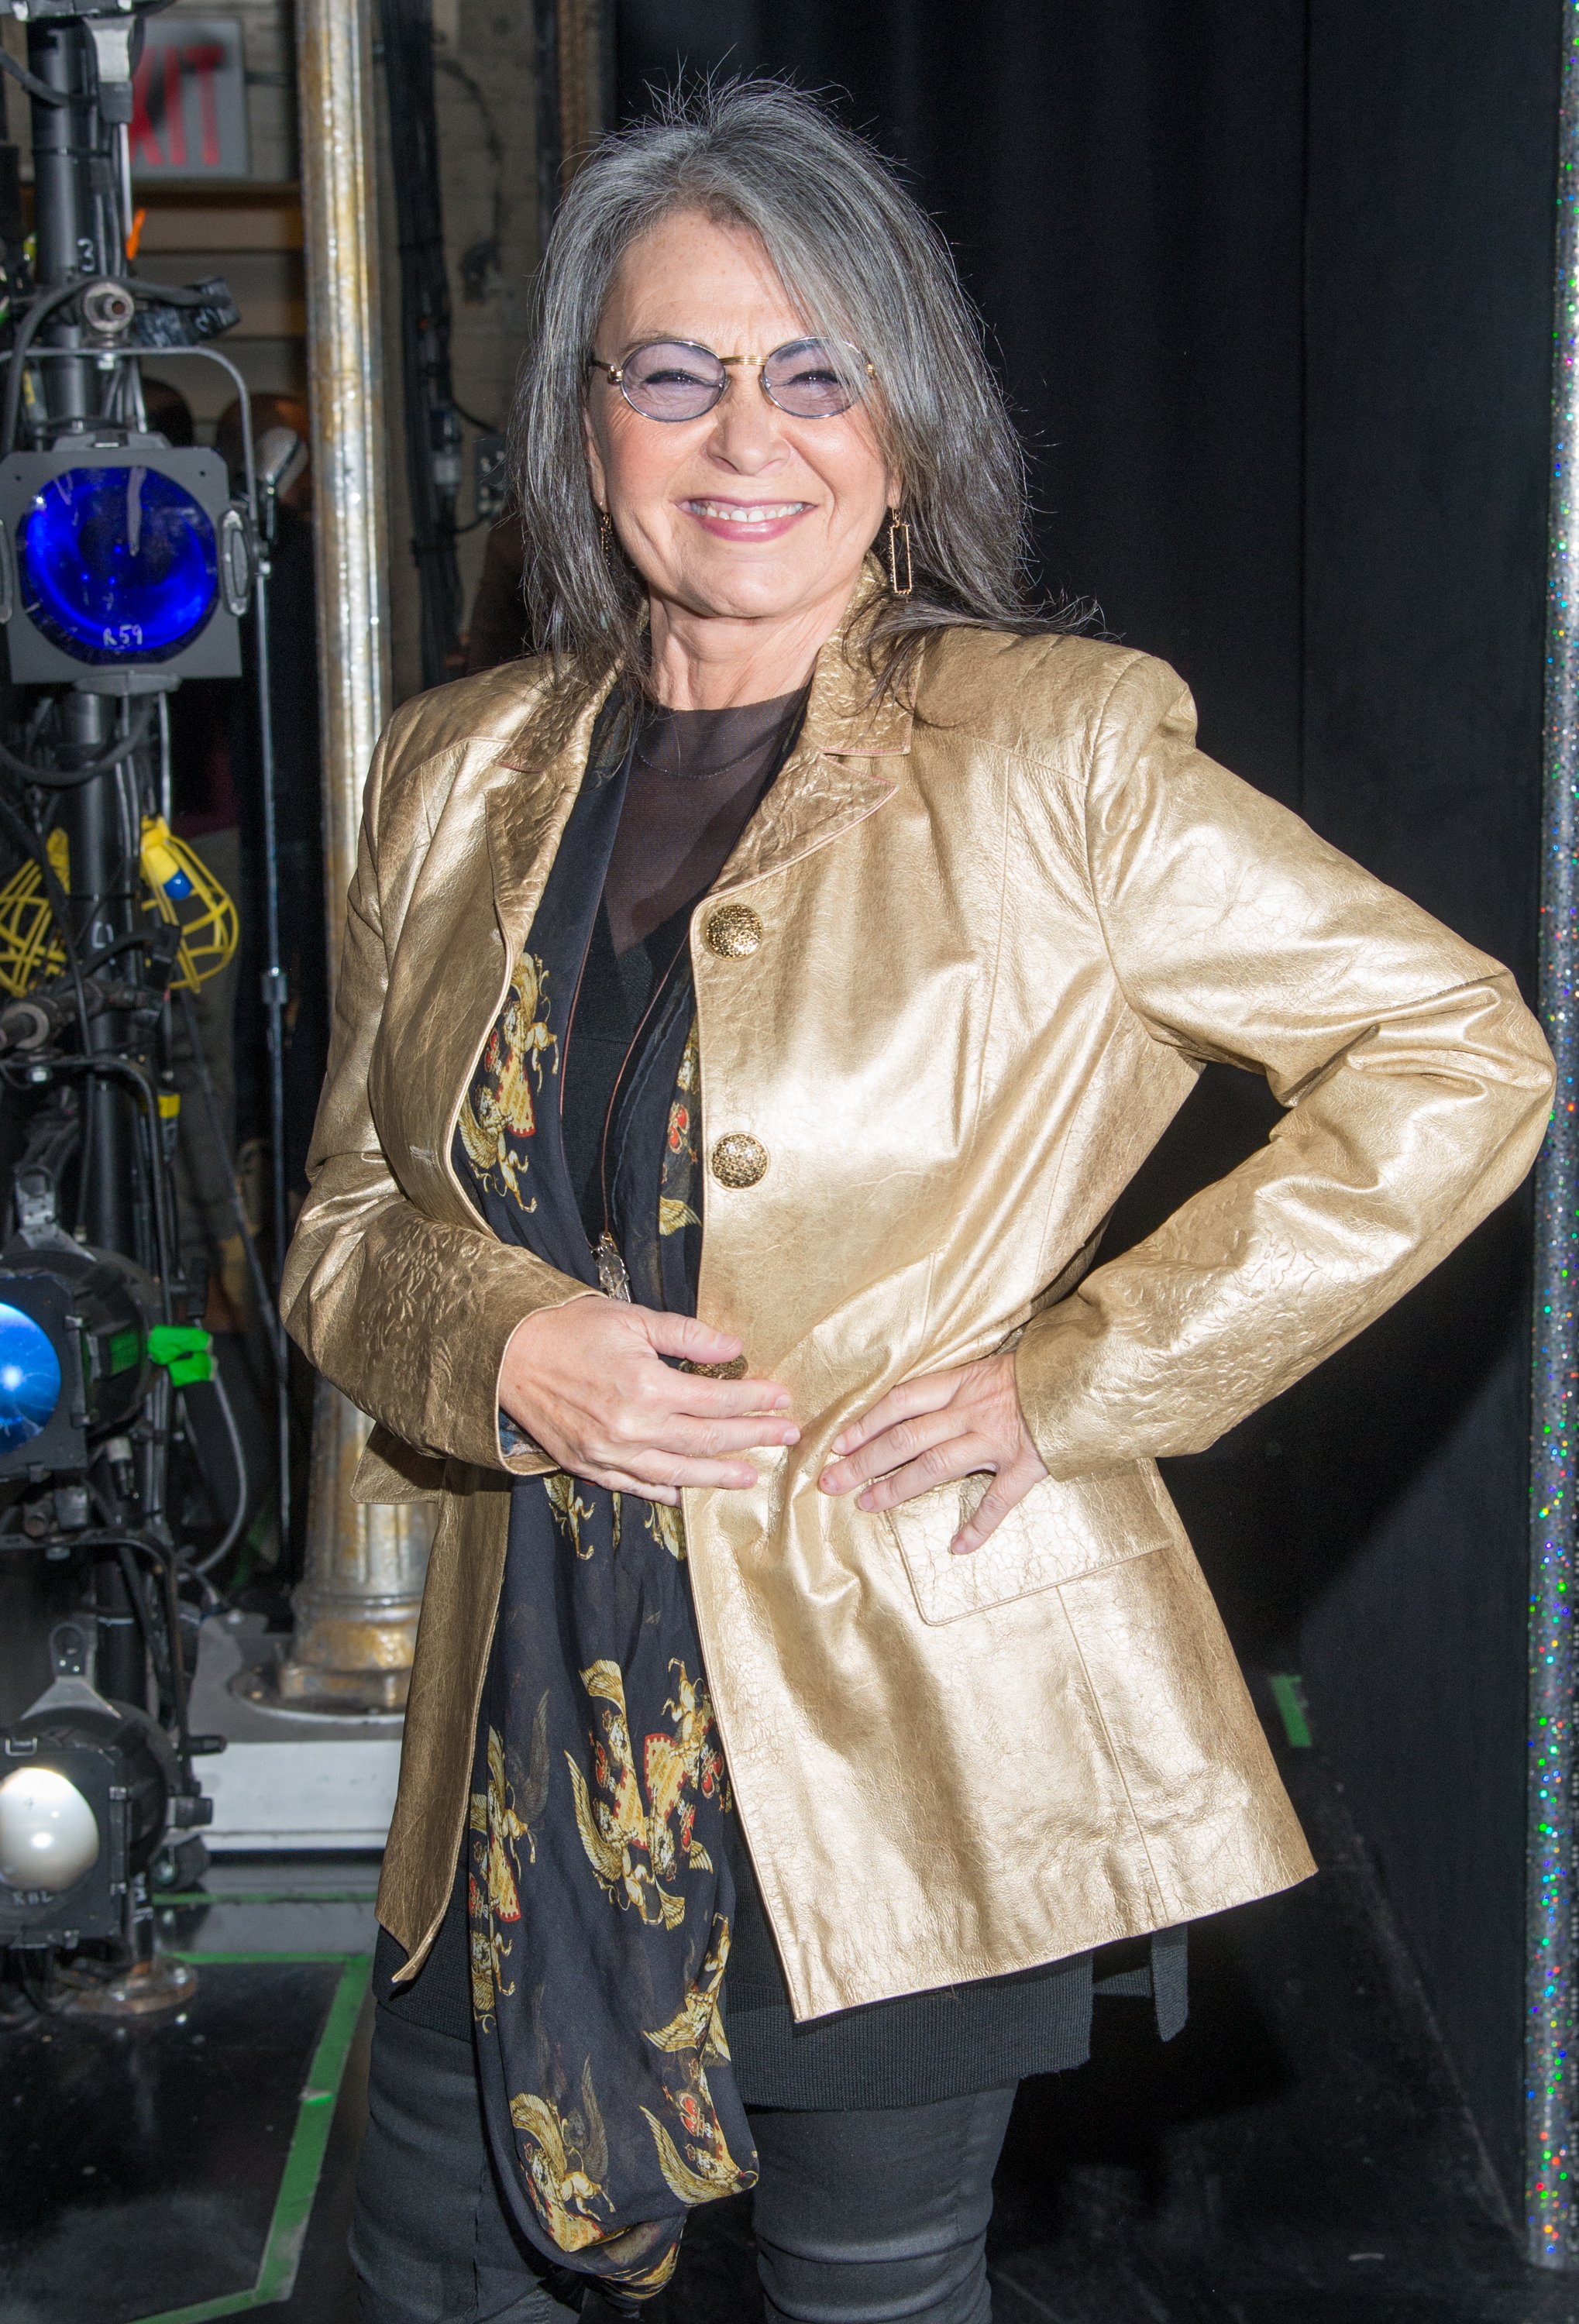 Actress Roseanne Barr attends Broadway "After midnight" at the Brooks Atkinson Theater on April 1, 2014 in New York City.  |  Source: Getty Images